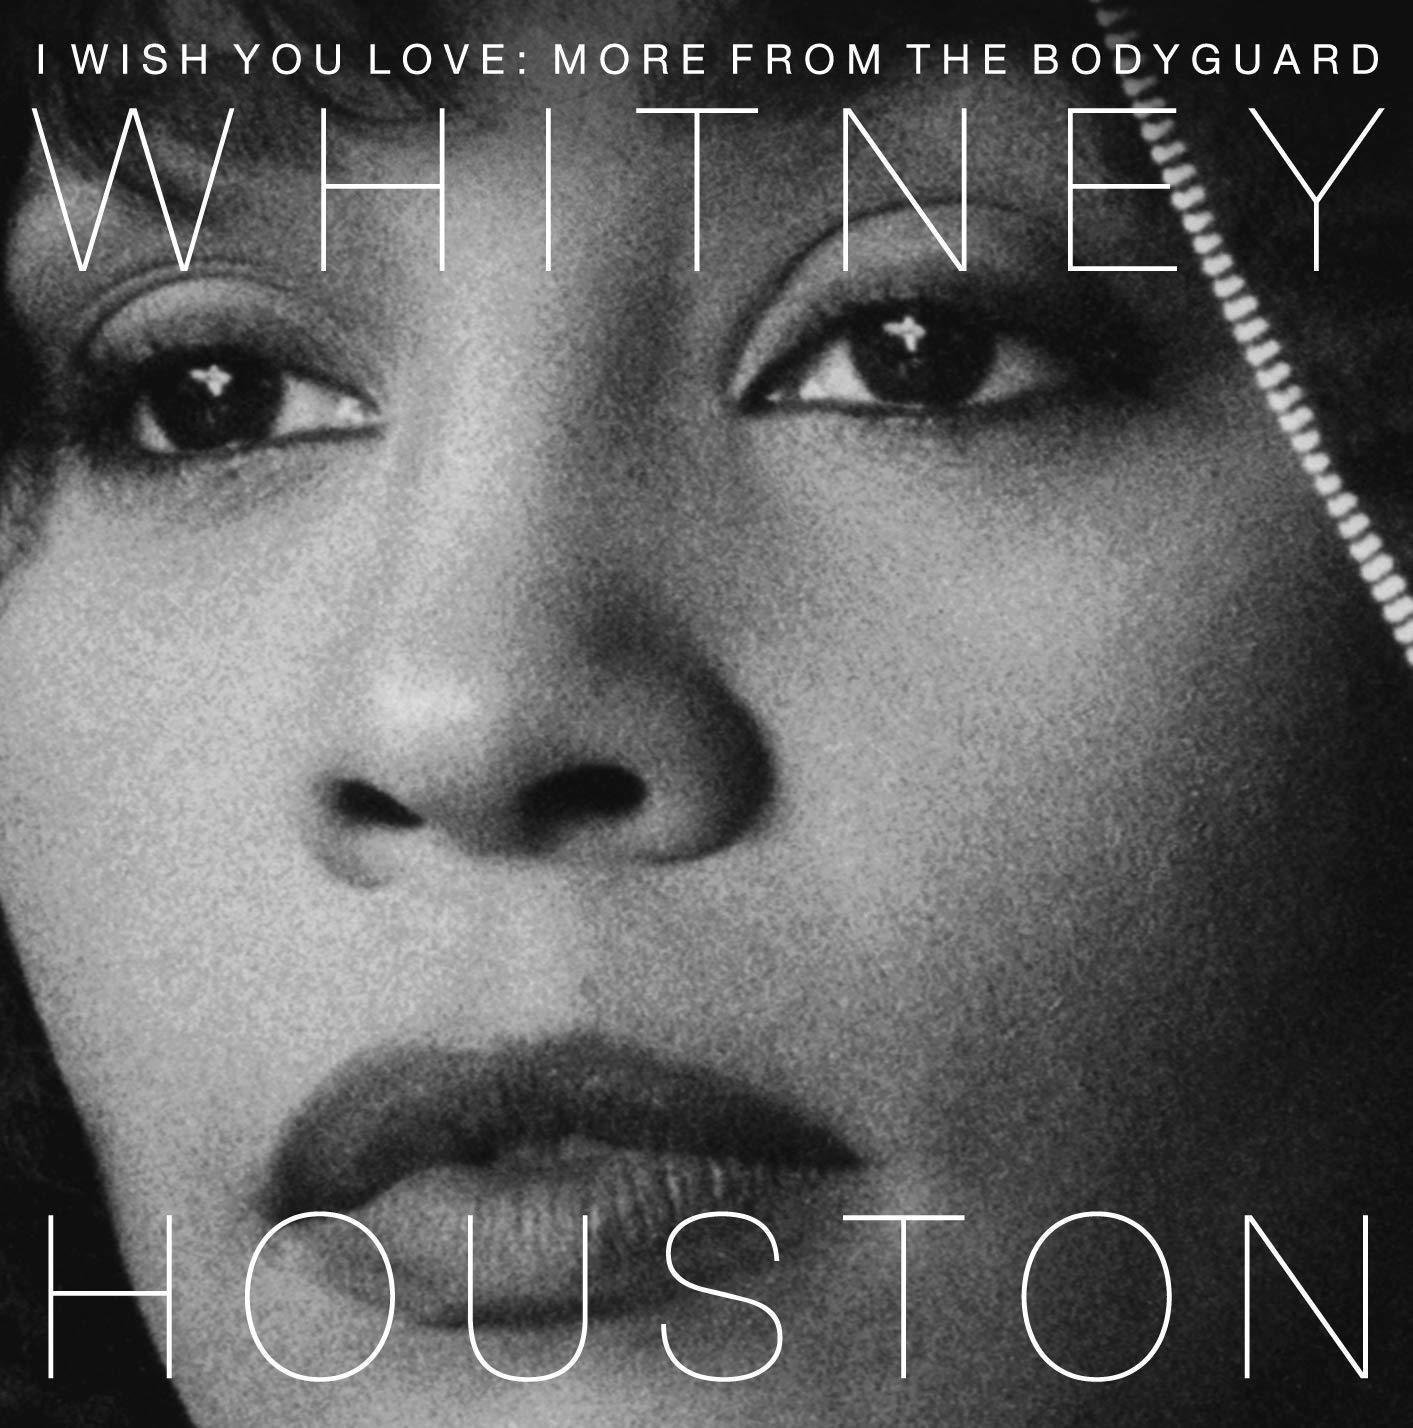 Whitney Houston - I Wish You Love: More From the Bodyguard (Anniversary Edition) (Purple Coloured Vinyl) (2 LP) Whitney Houston